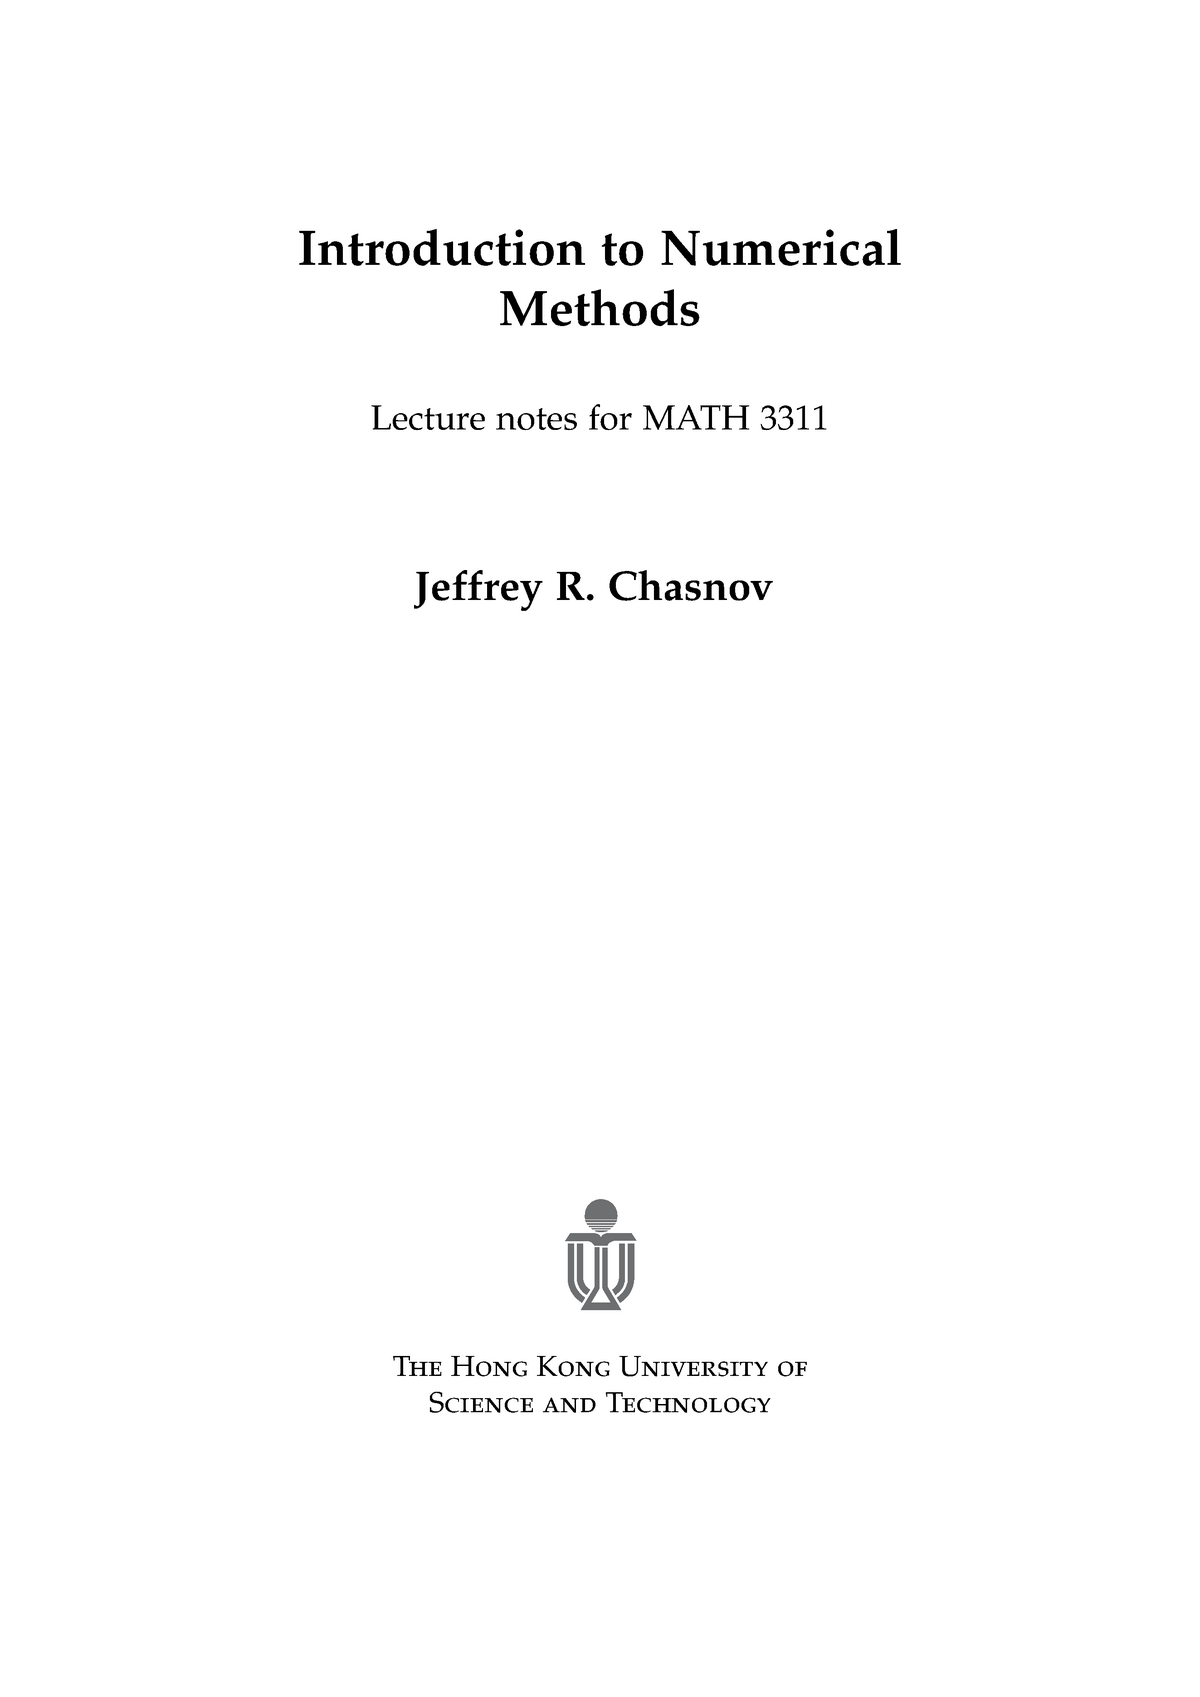 numerical methods phd thesis